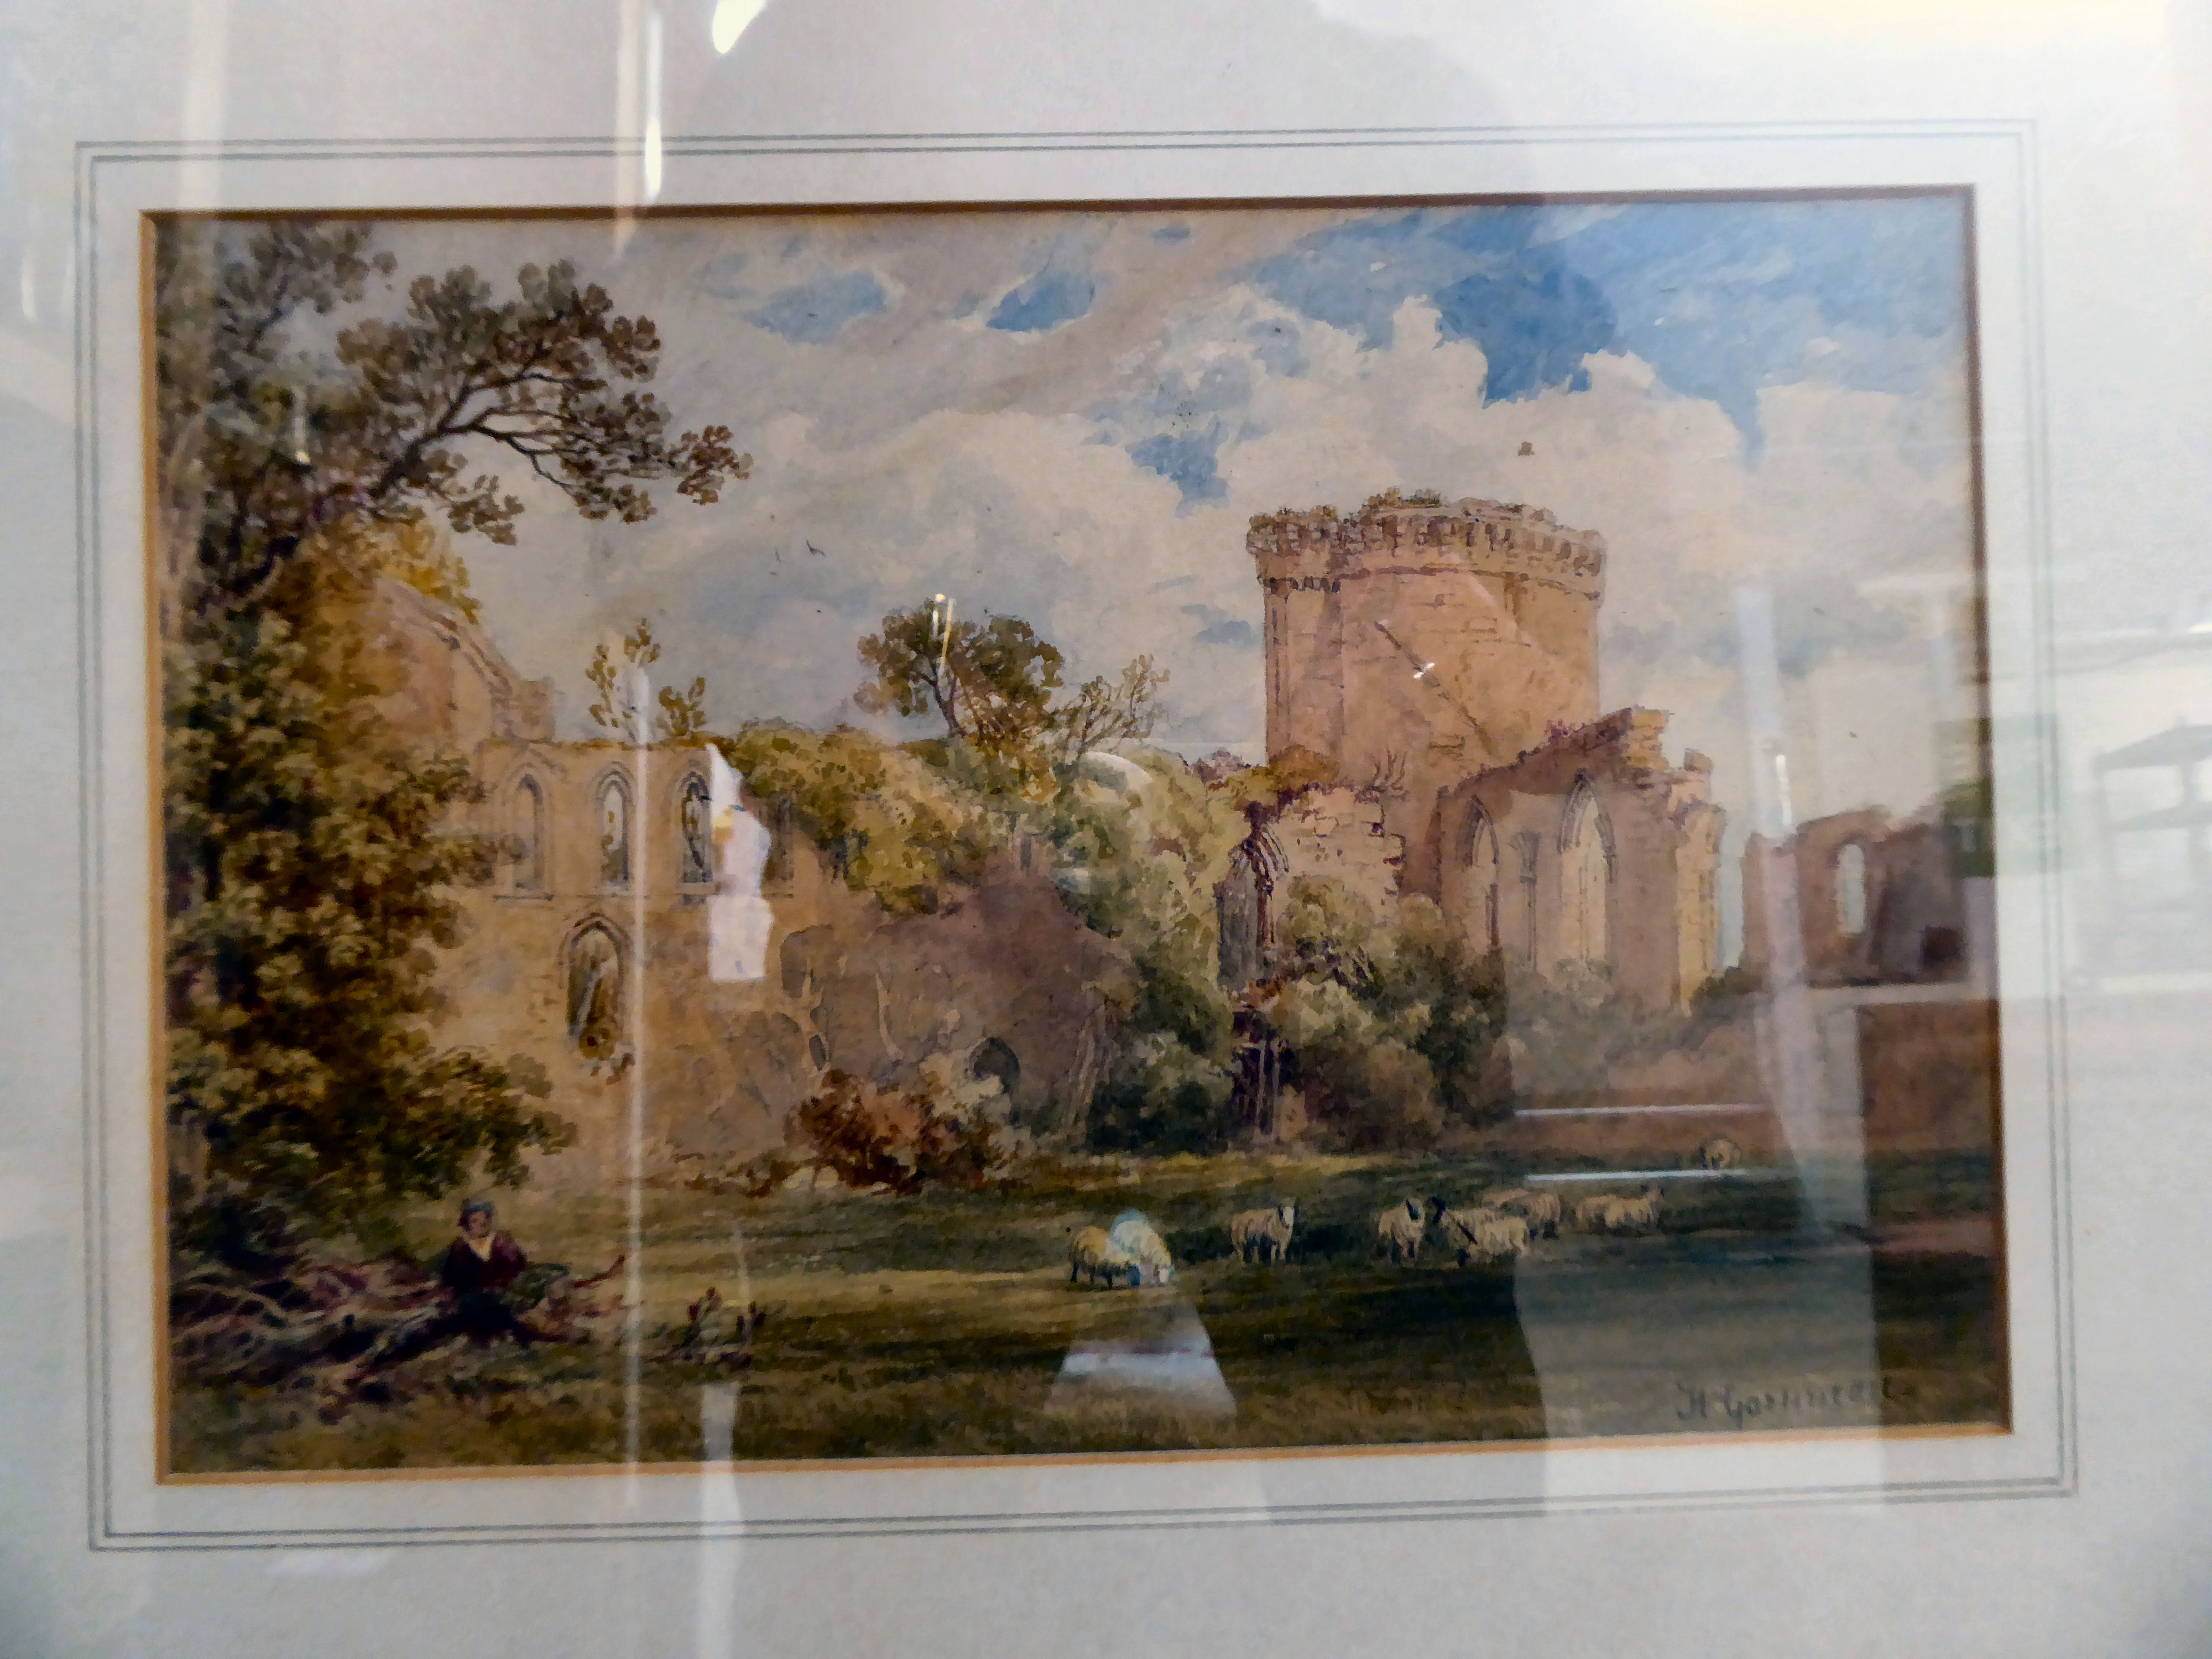 Henry Gustineau - sheep grazing in front of castle ruins  watercolour  bears a signature  8" x - Image 2 of 3